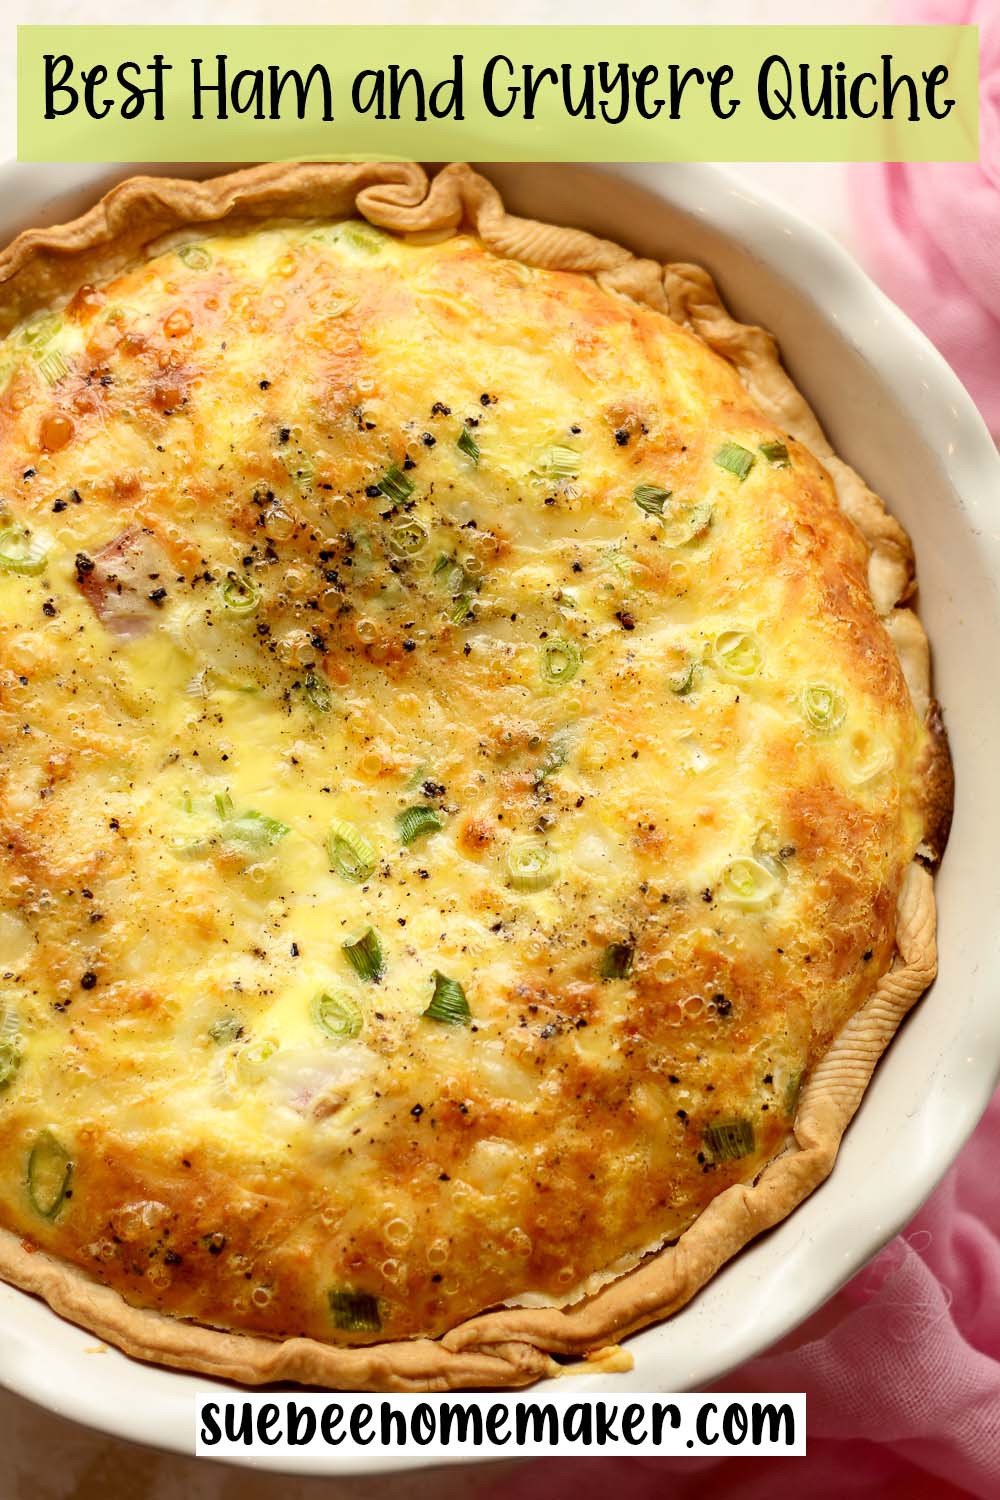 A photo of the best ham and gruyere quiche.